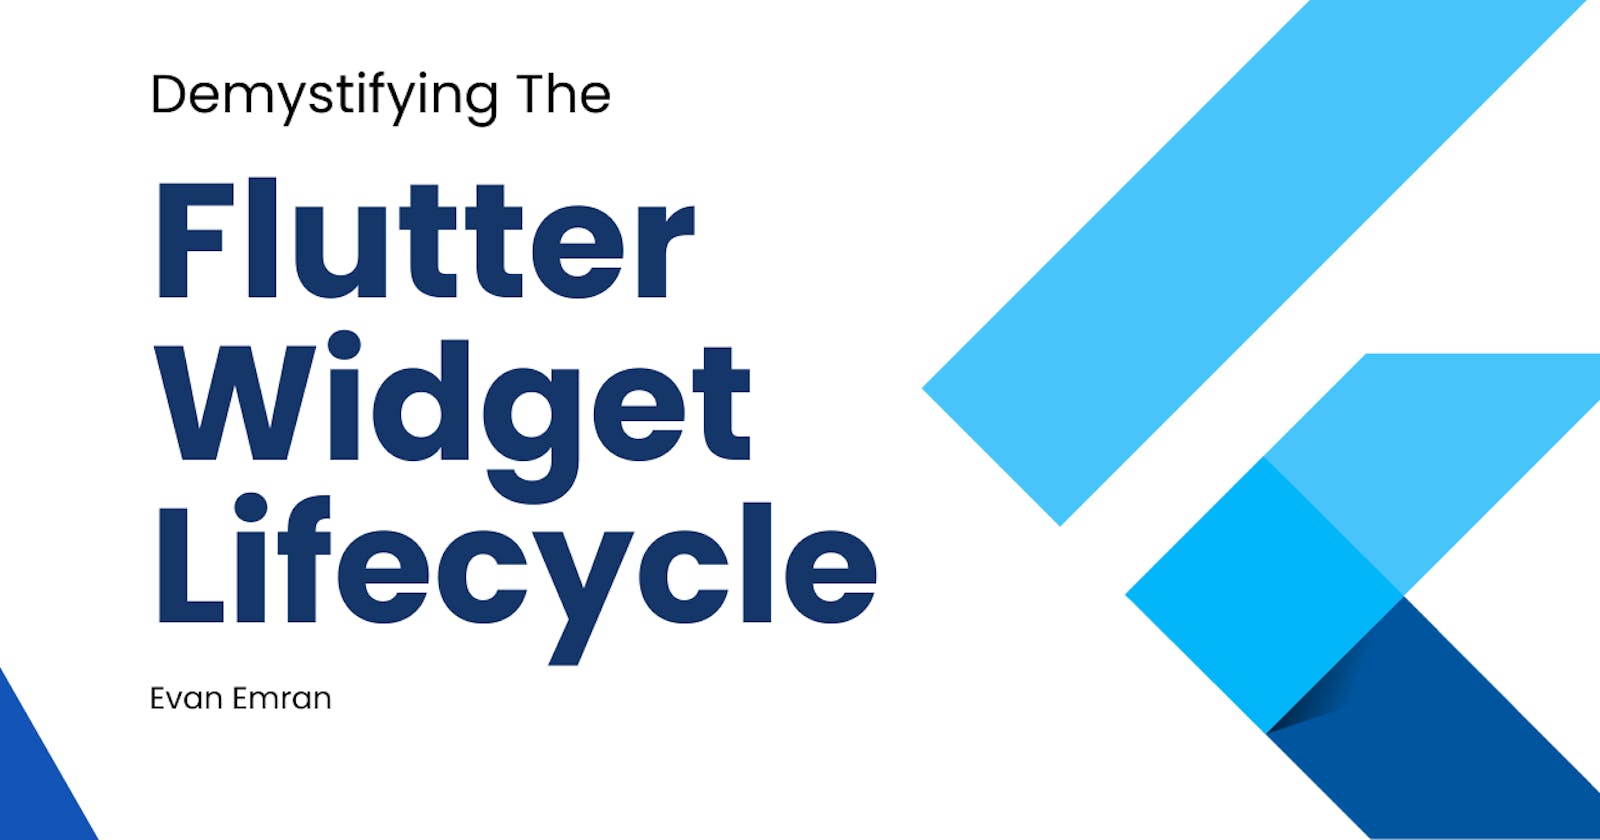 Demystifying the Flutter Widget Lifecycle